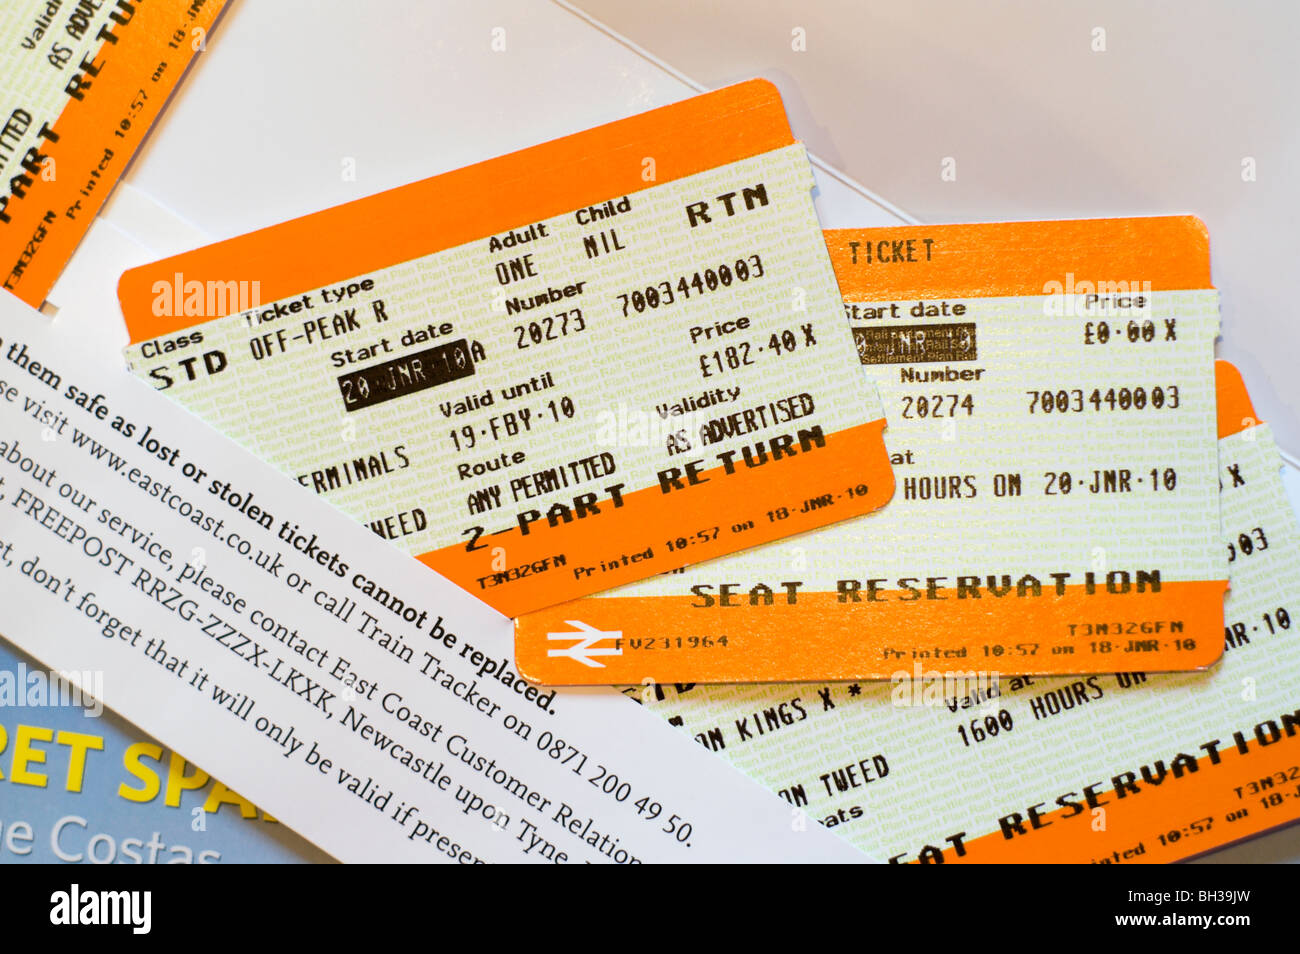 British railway return ticket from Scotland to London 2010 normal price with seat reservations Stock Photo